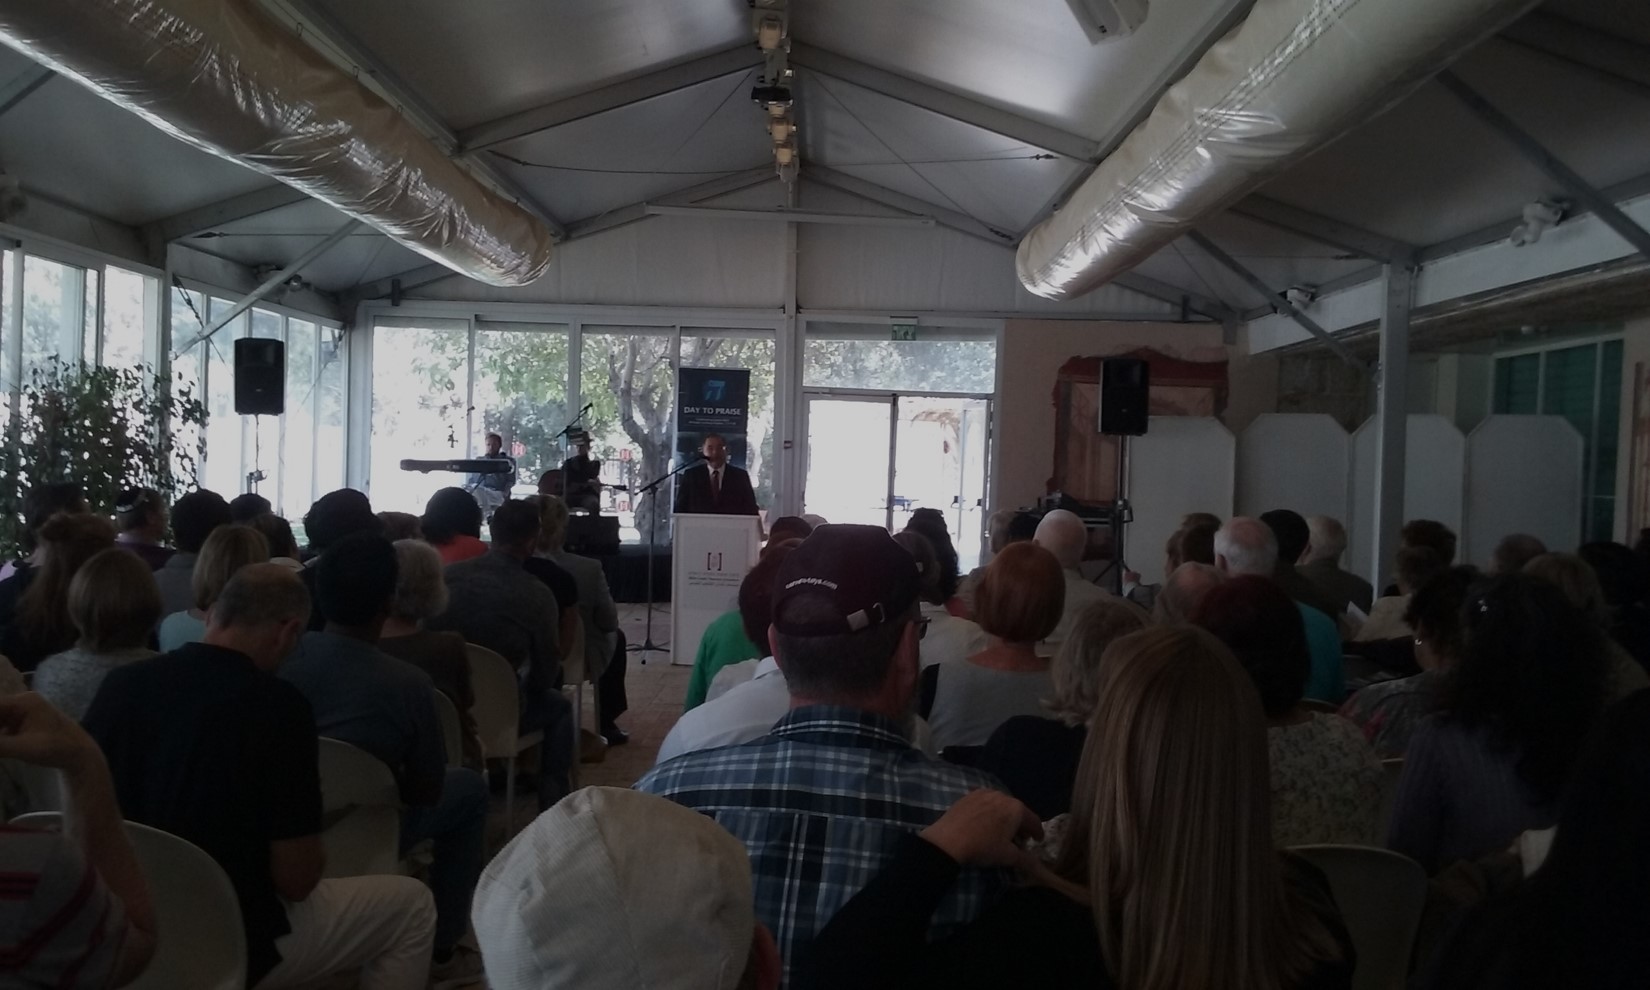 Rabbi Shlomo Riskin addresses a mixed assembly of Christians, Jews, and Hebrew Roots believers at the Center for Jewish-Christian Understanding and Cooperation Sukkot Event.